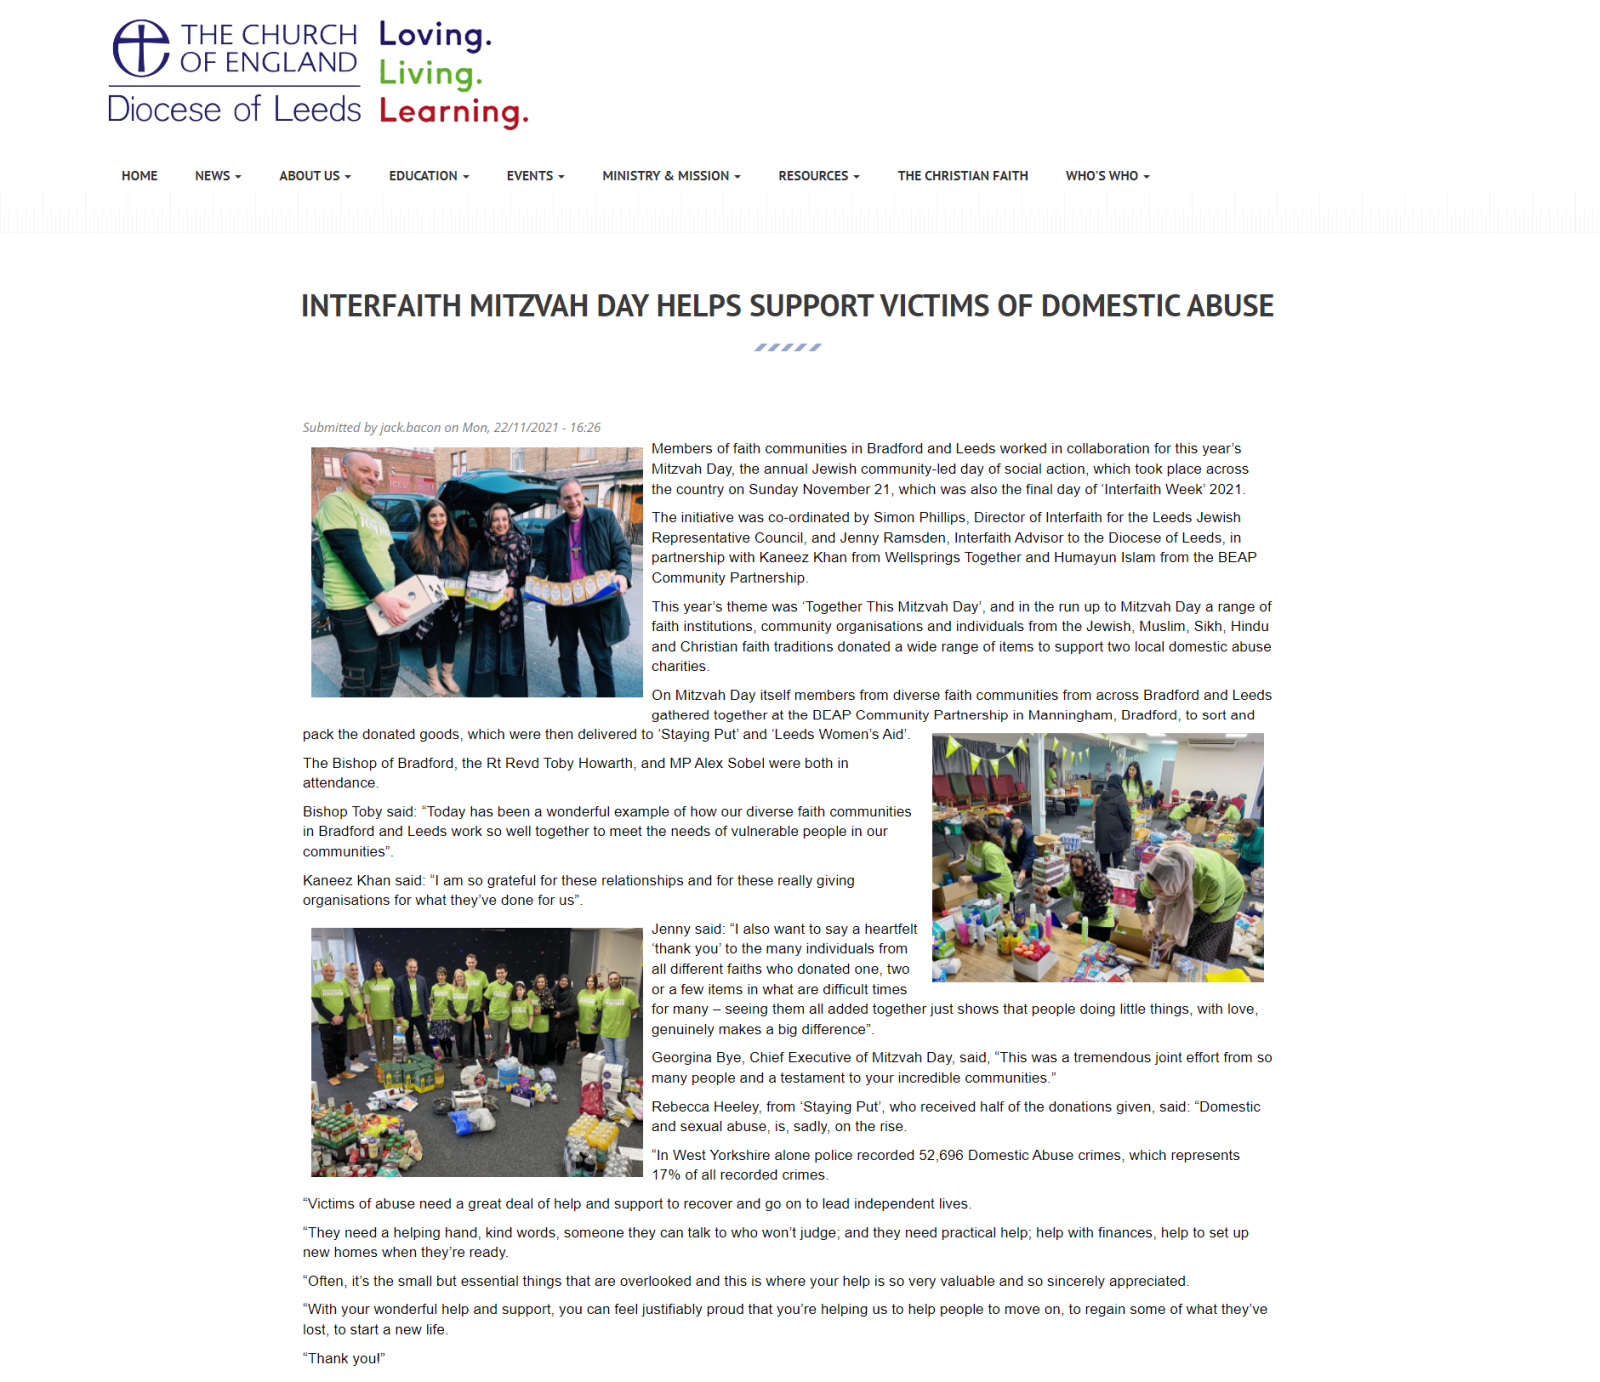 Our wonderful interfaith events even made the Church of England website